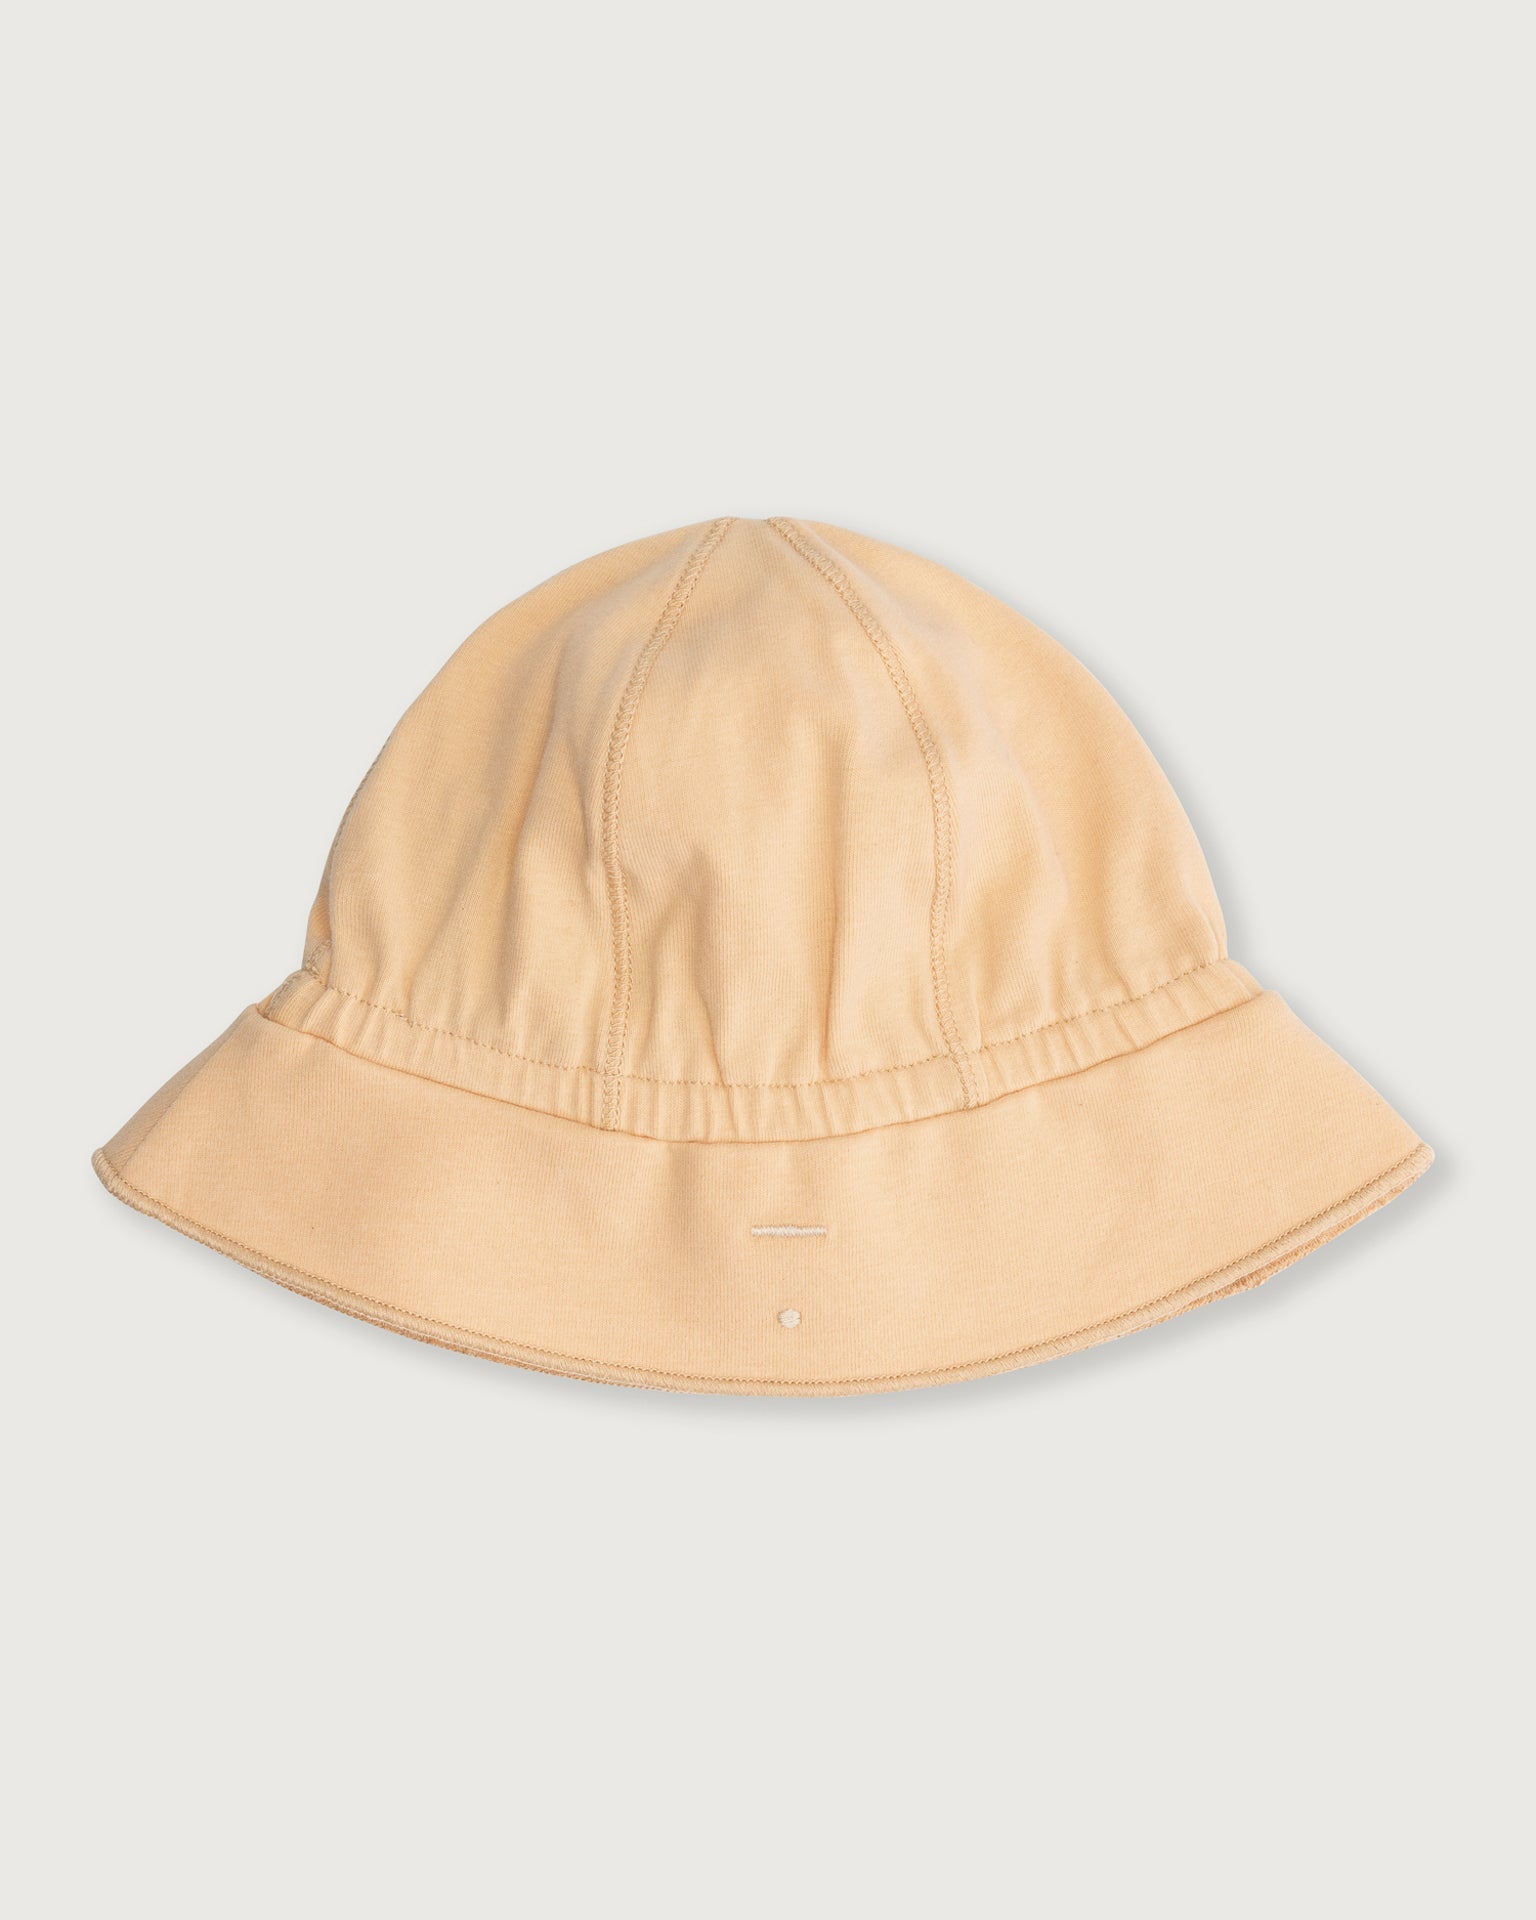 Little gray label baby accessories baby sun hat in apricot